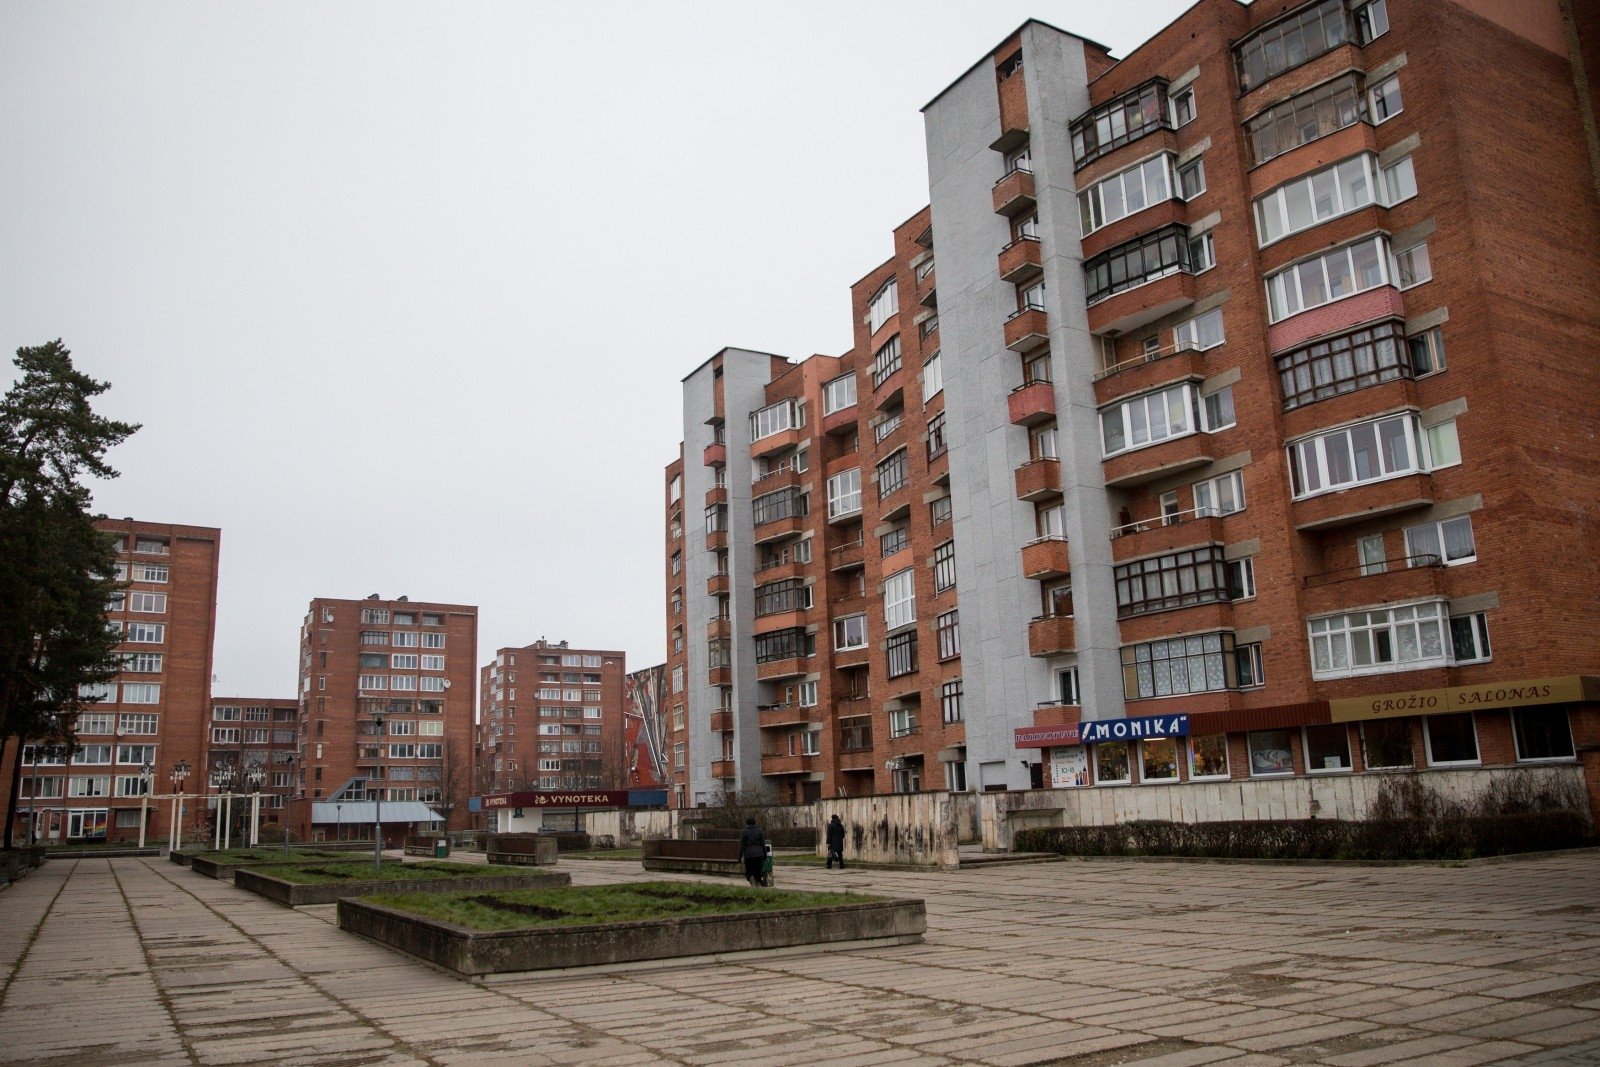 Visaginas - town built for workers of Soviet nuclear plant